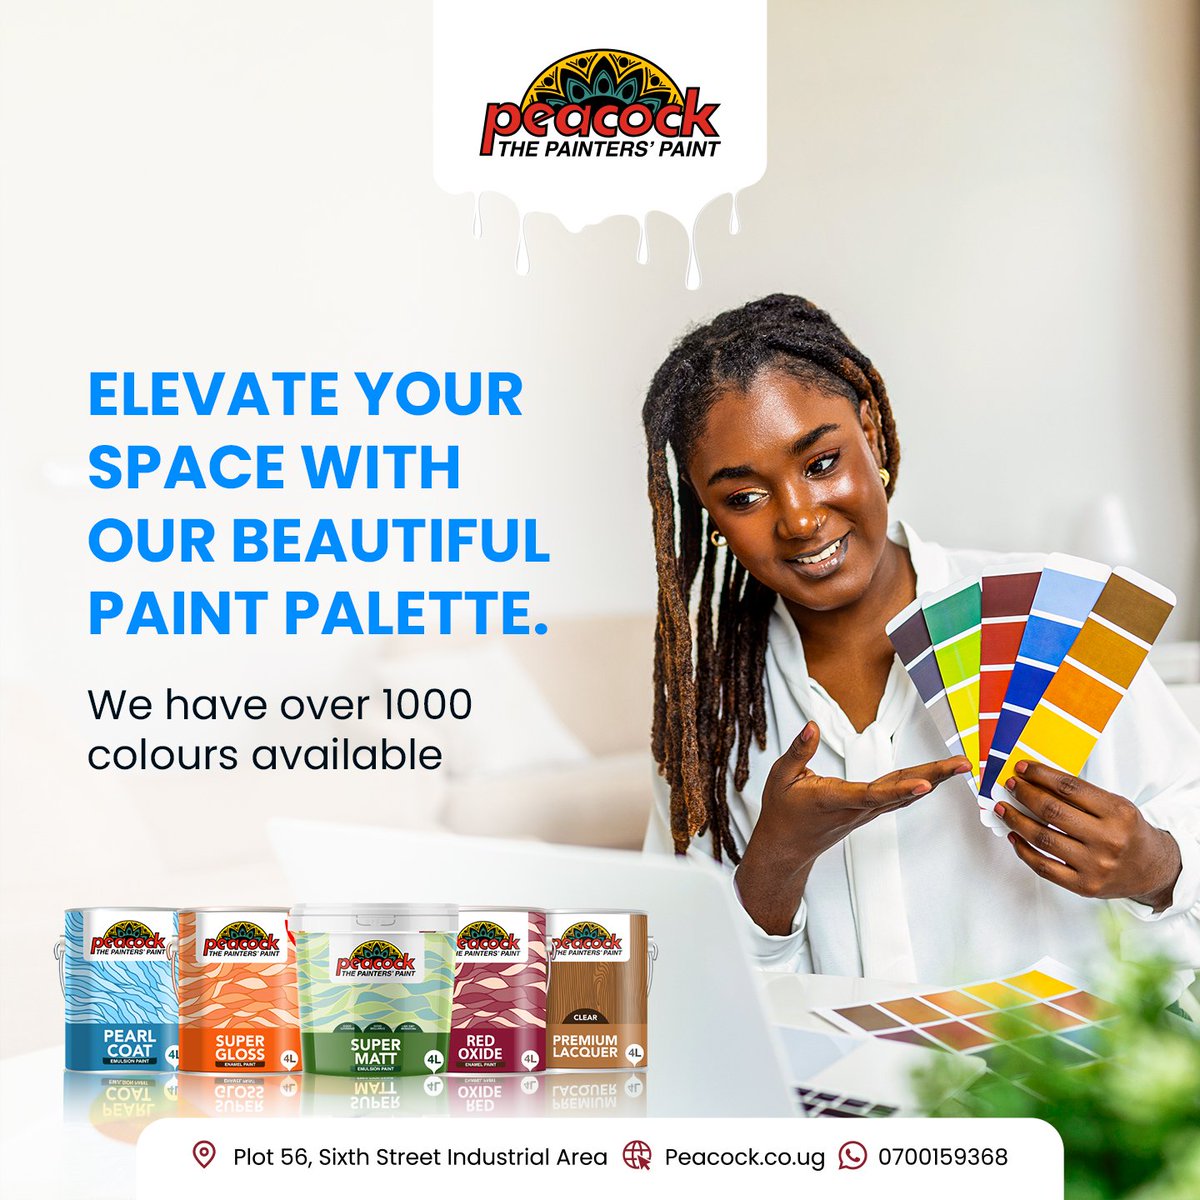 Make a space your own with our quality paints. Get in touch with our sales team for more information. ☎: 0700 159 368

#PeacockPaints 🦚
#ThePaintersPaint